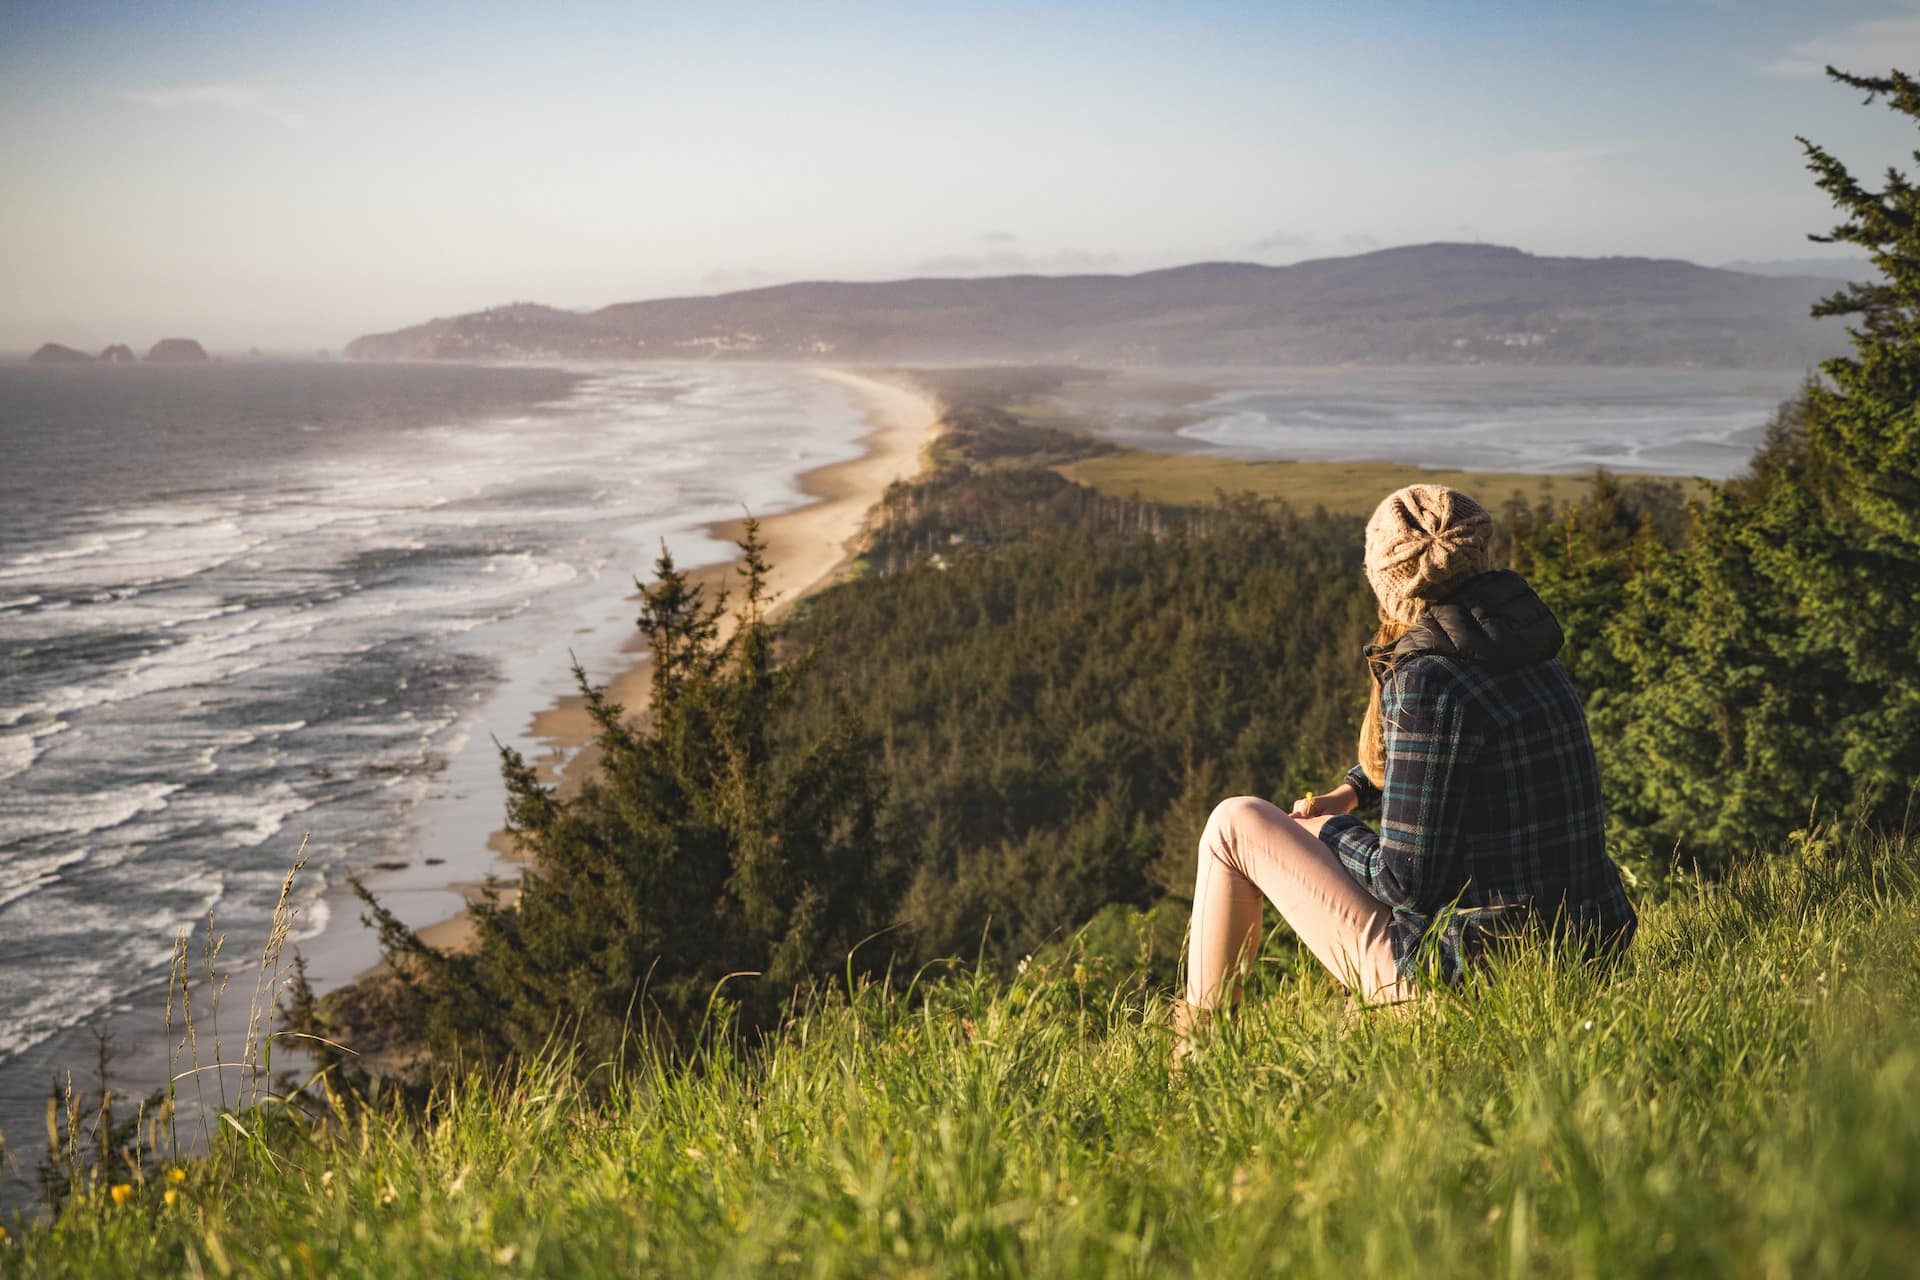 A person wearing a beanie and checkered shirt sits on a grassy hill, overlooking a scenic coastline with waves crashing onto a long stretch of beach. The landscape, perfect for mental health treatment, is filled with dense forests and distant mountains under a clear sky.